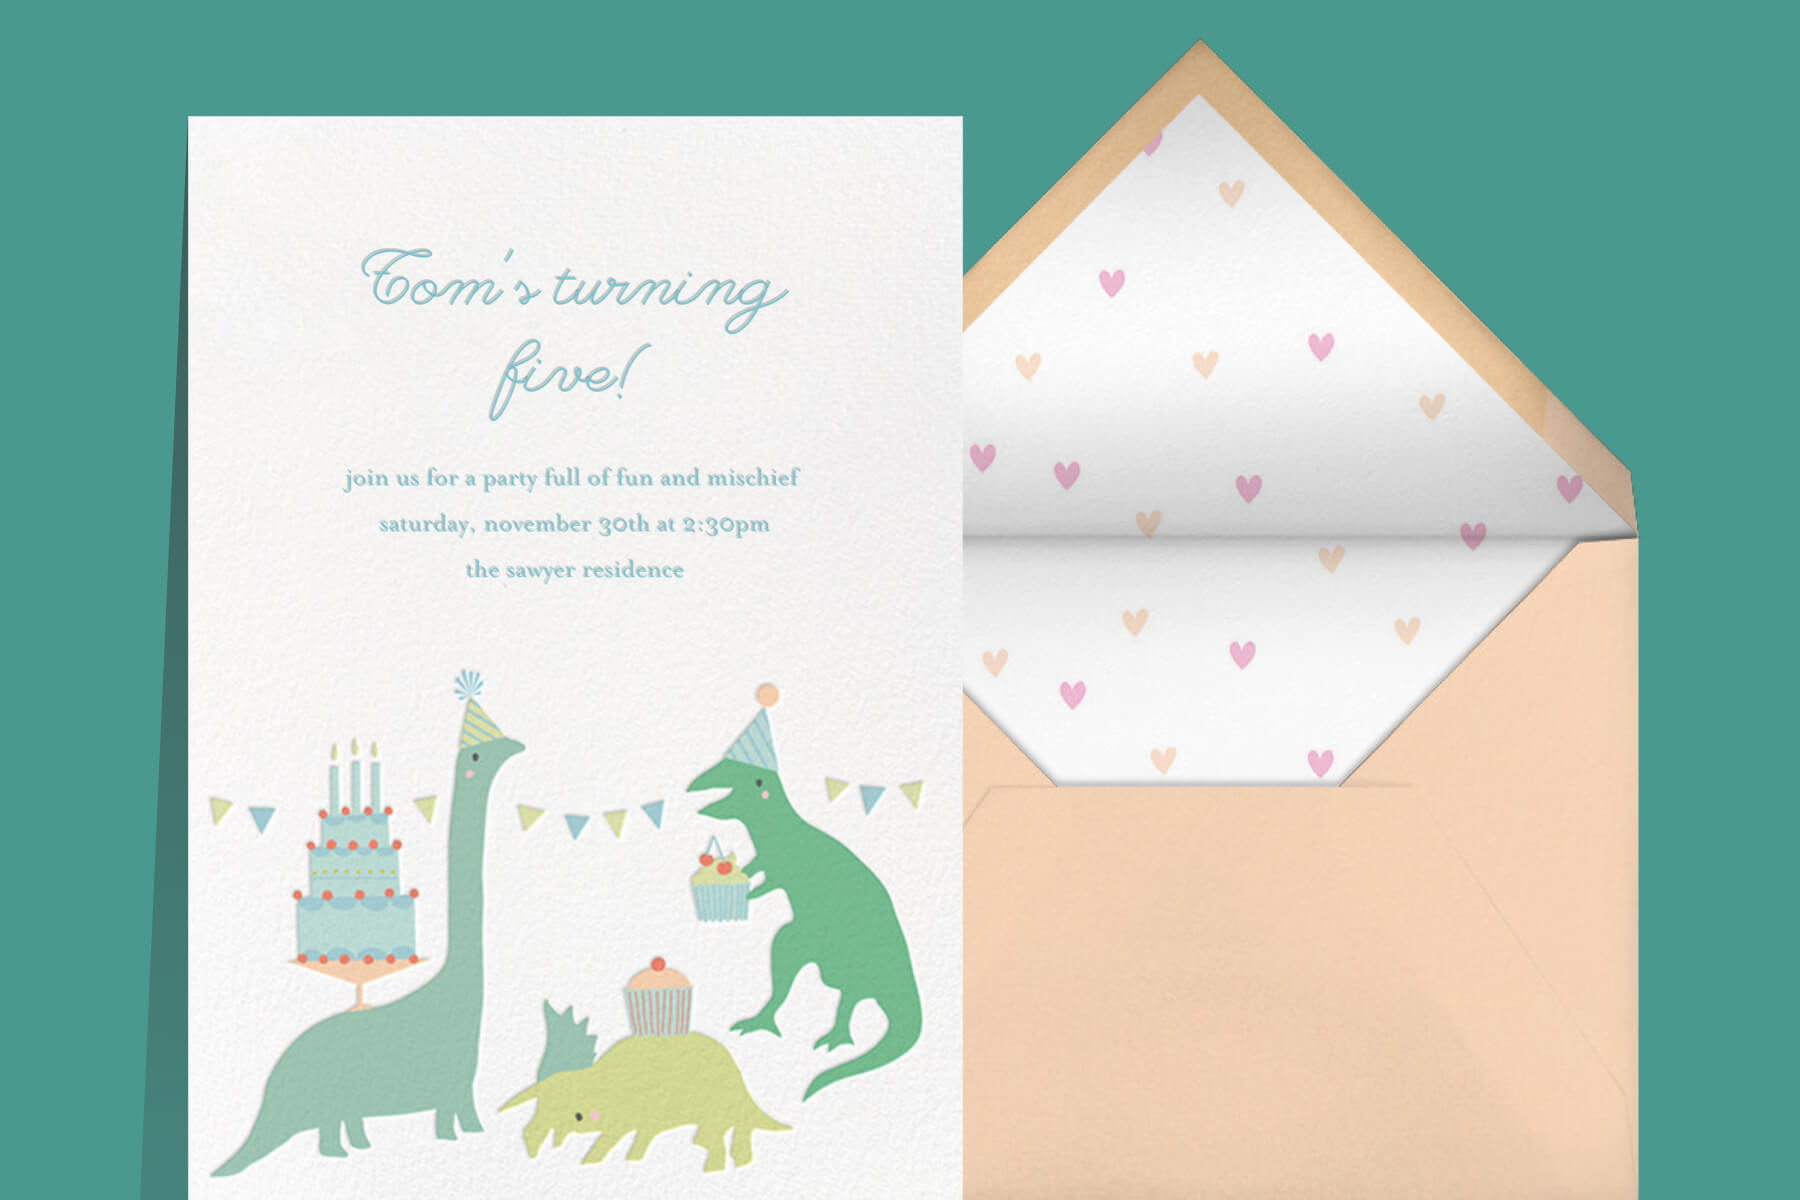 Green invitation with dinosaurs on paper for birthday parade